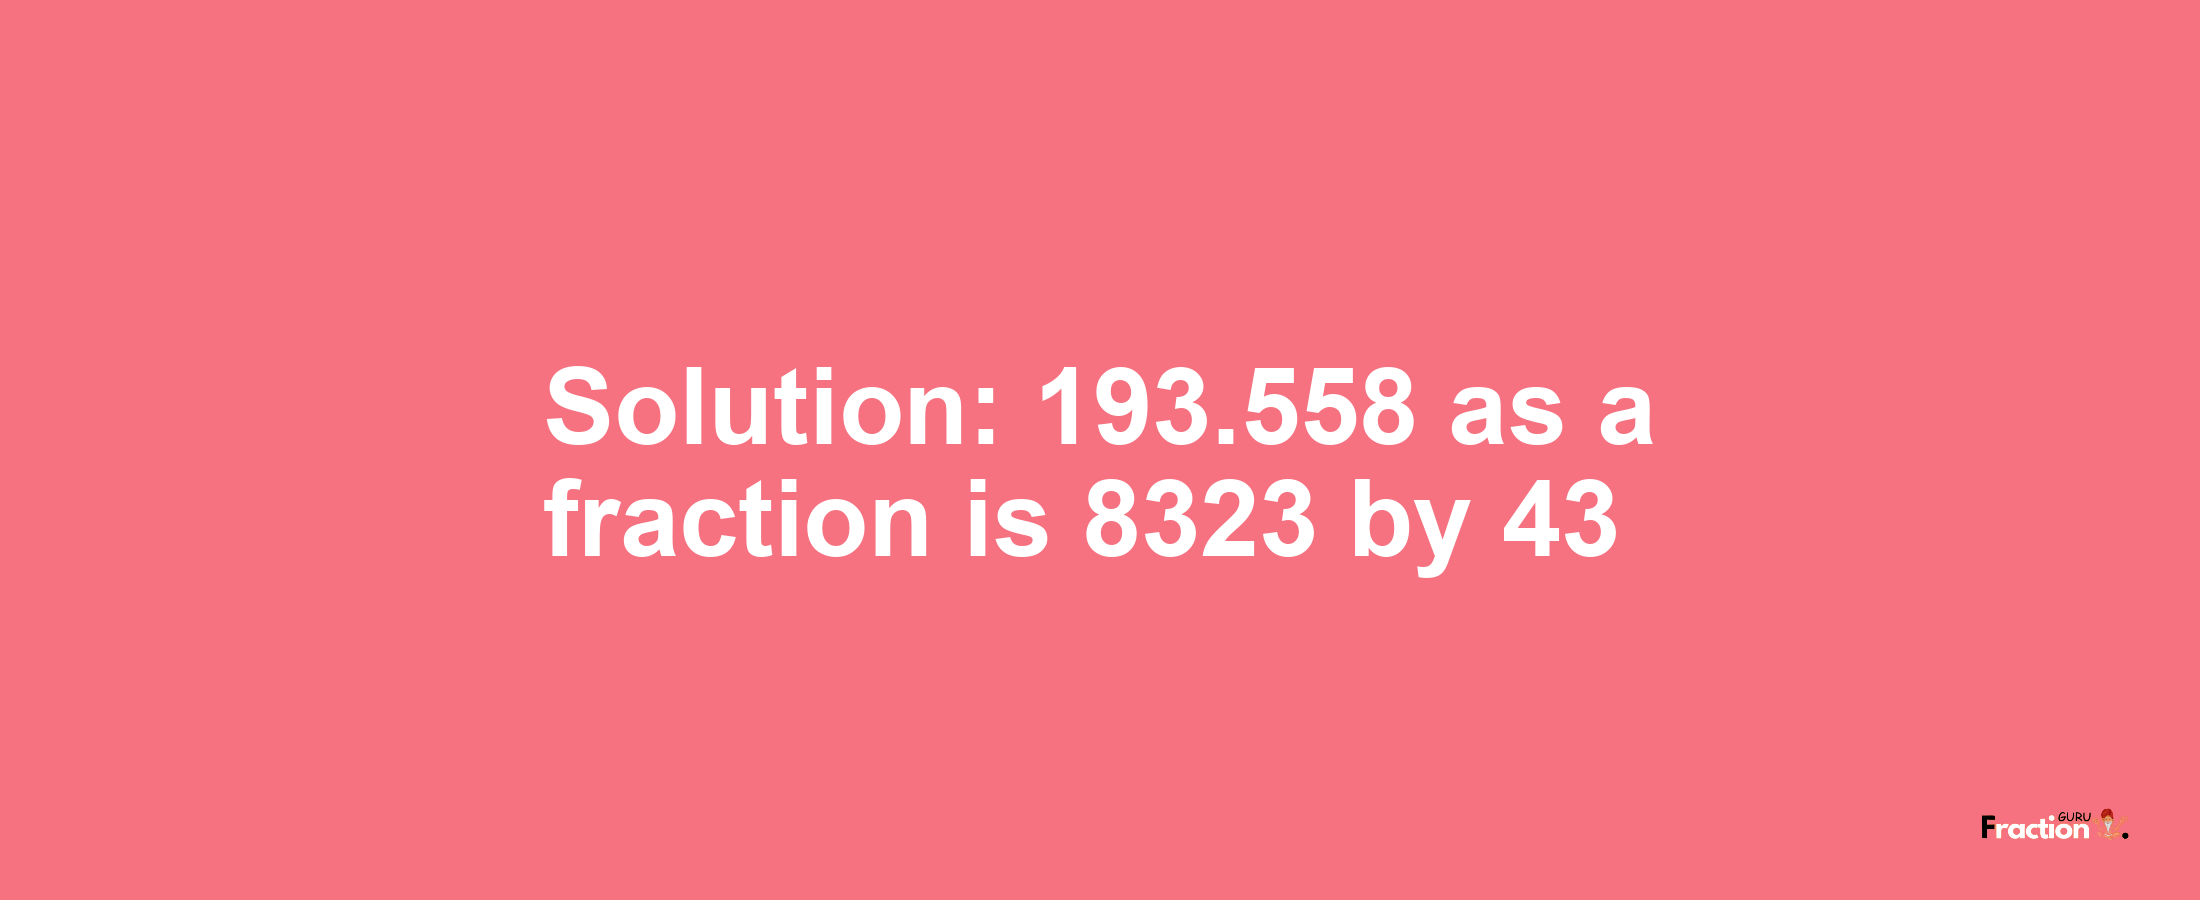 Solution:193.558 as a fraction is 8323/43